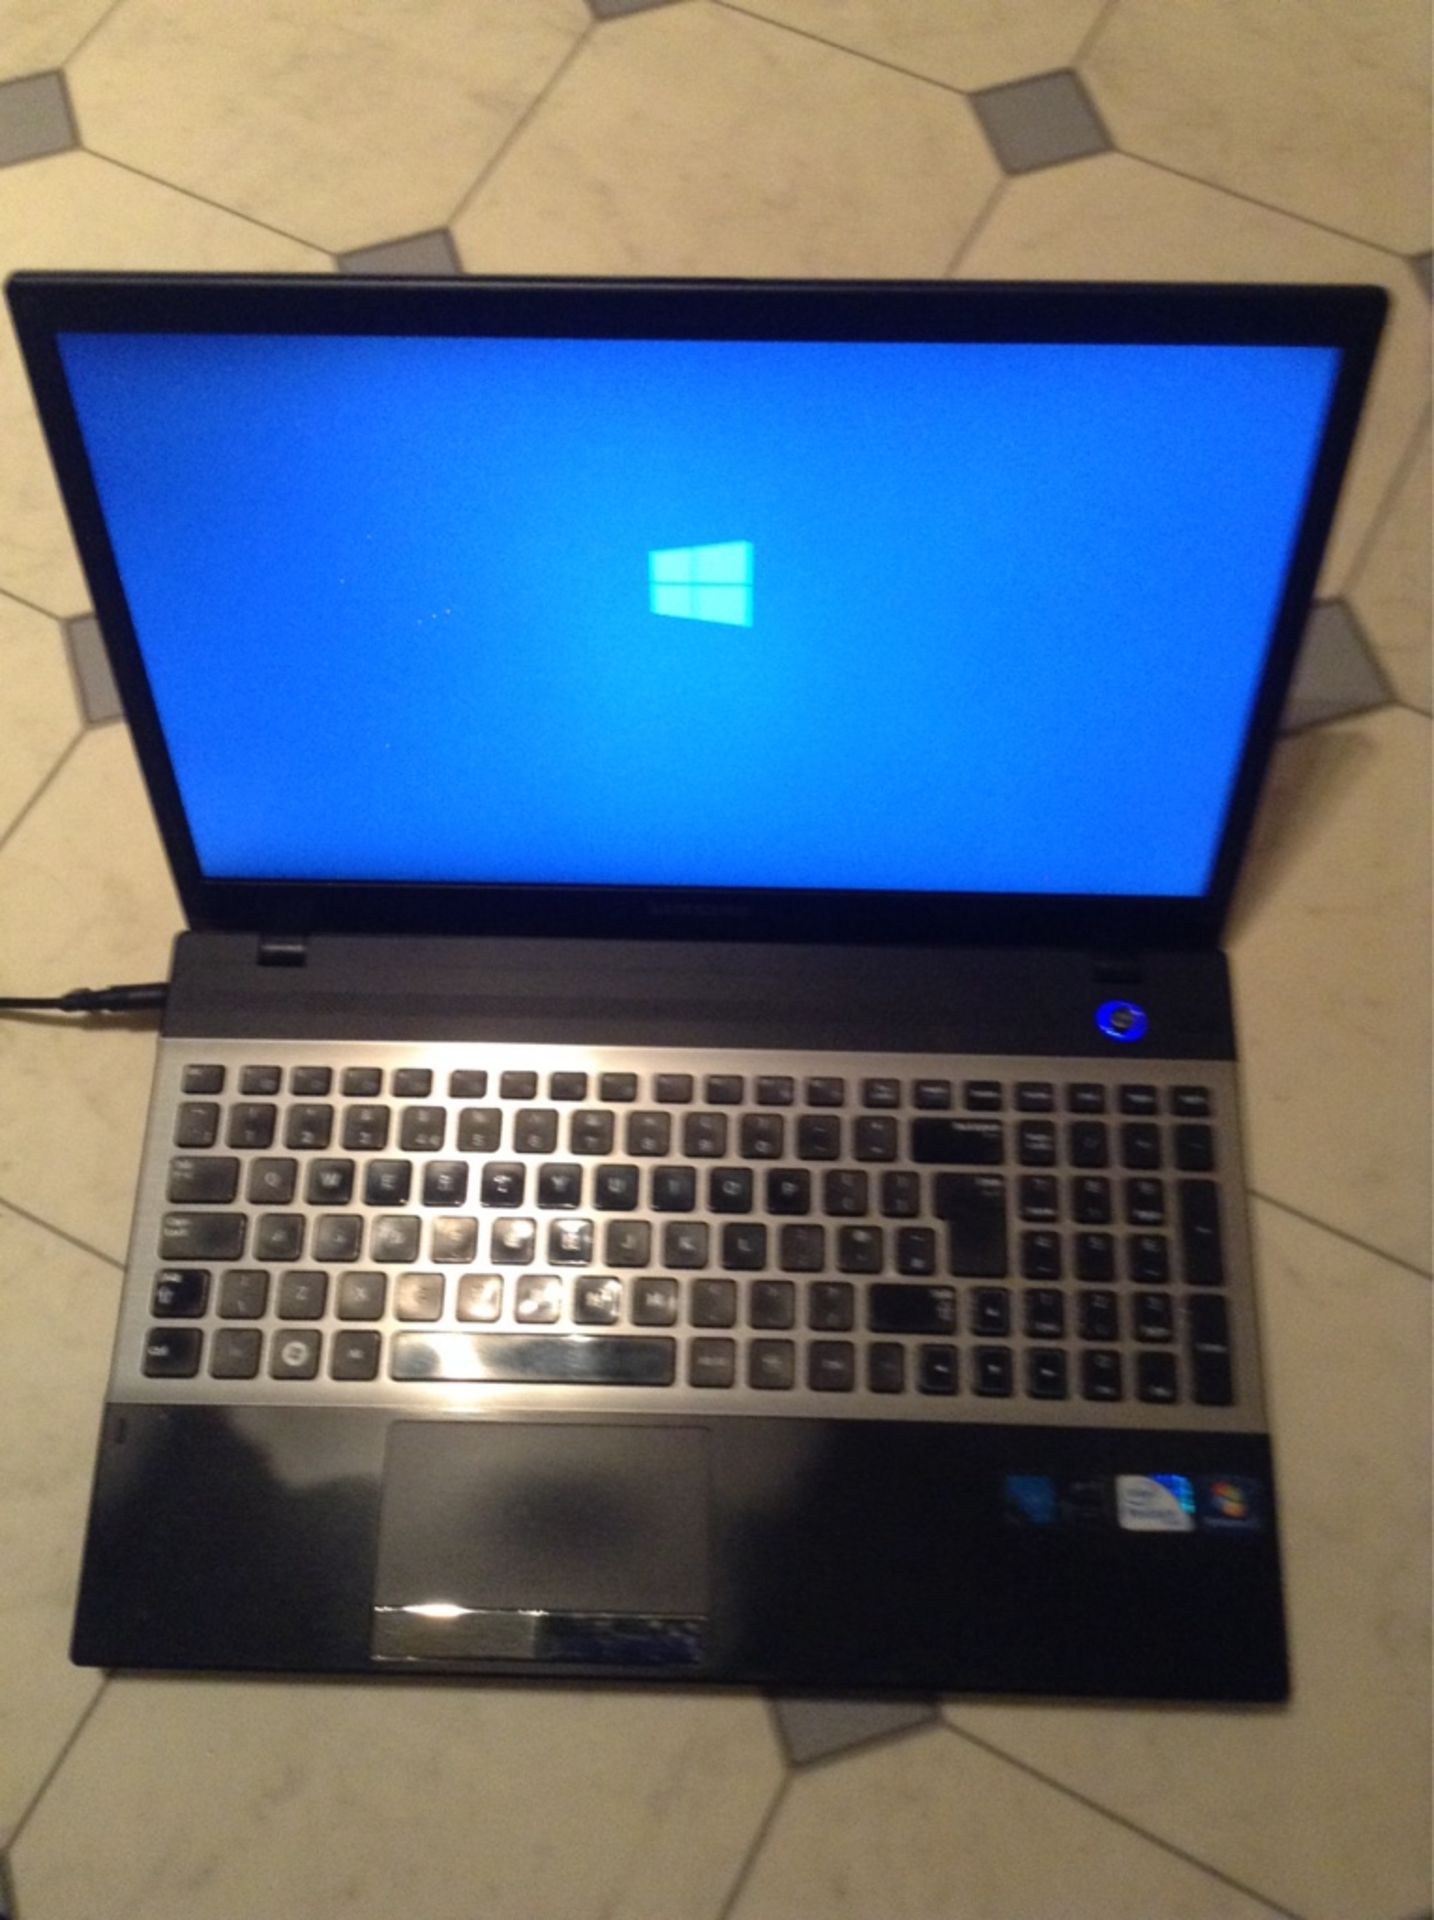 samsung notebook np300v5a 6/8gb windows 10 installed unregistered but problems loading needs wipe - Image 5 of 10